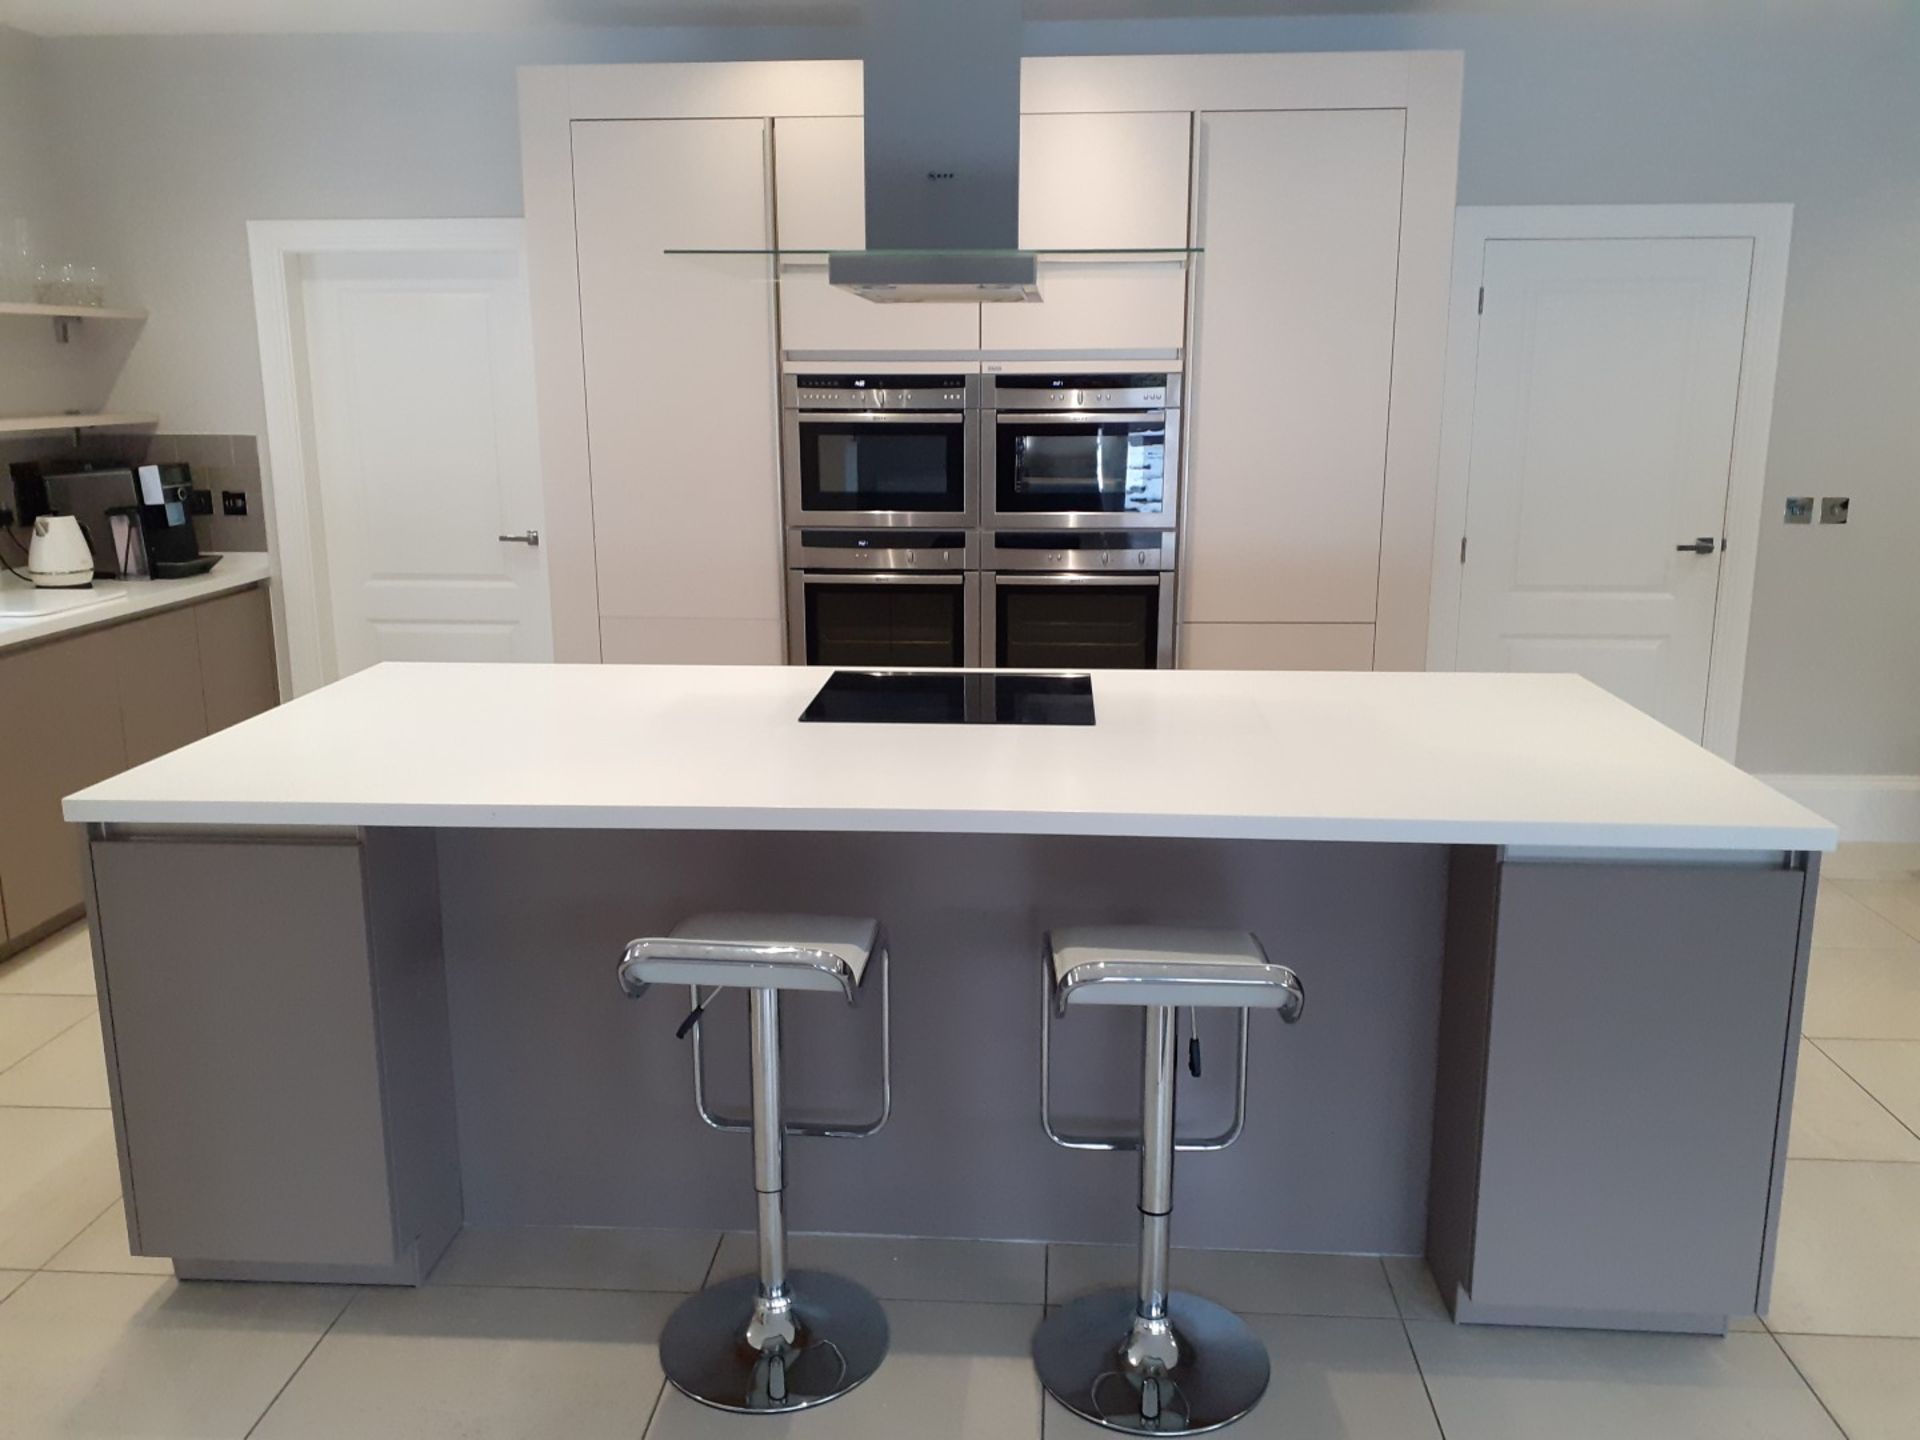 1 x SieMatic Handleless Fitted Kitchen With Intergrated NEFF Appliances, Corian Worktops And Island - Image 3 of 92